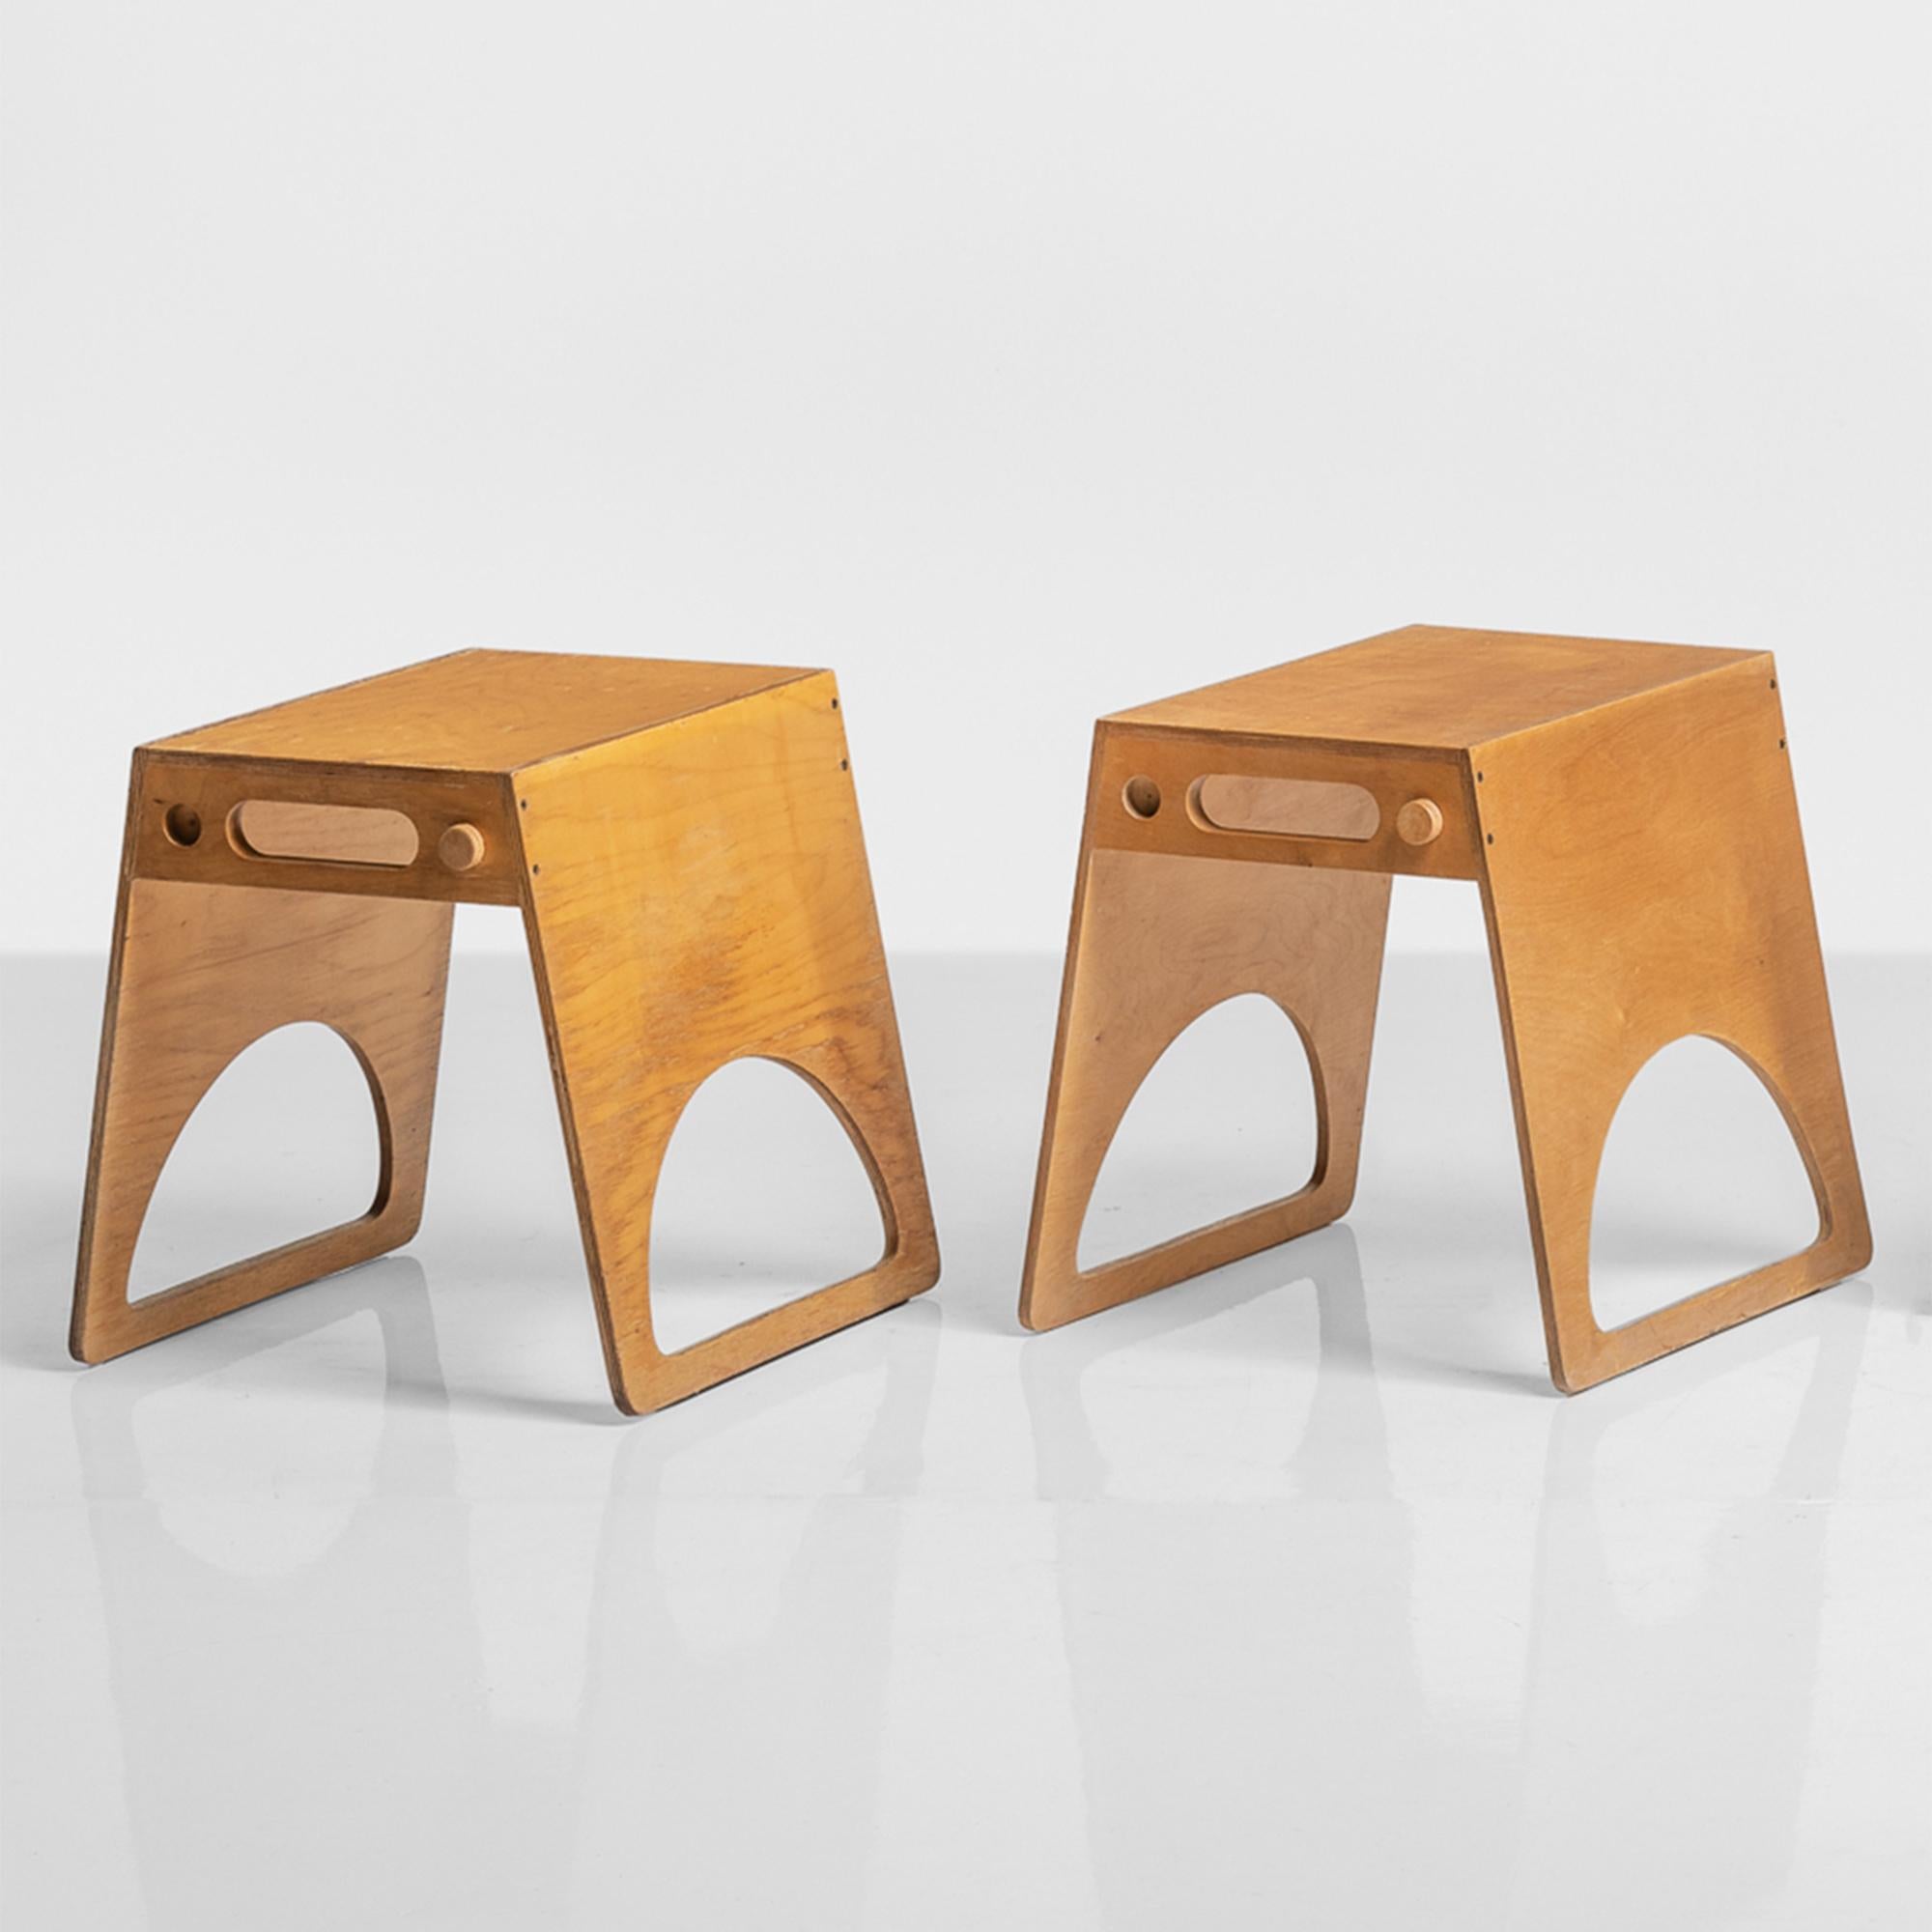 Scagbelli stools by Alberto Paoli, Italy, circa 1950

Playful, geometric forms capable of modular attachment or stacking.